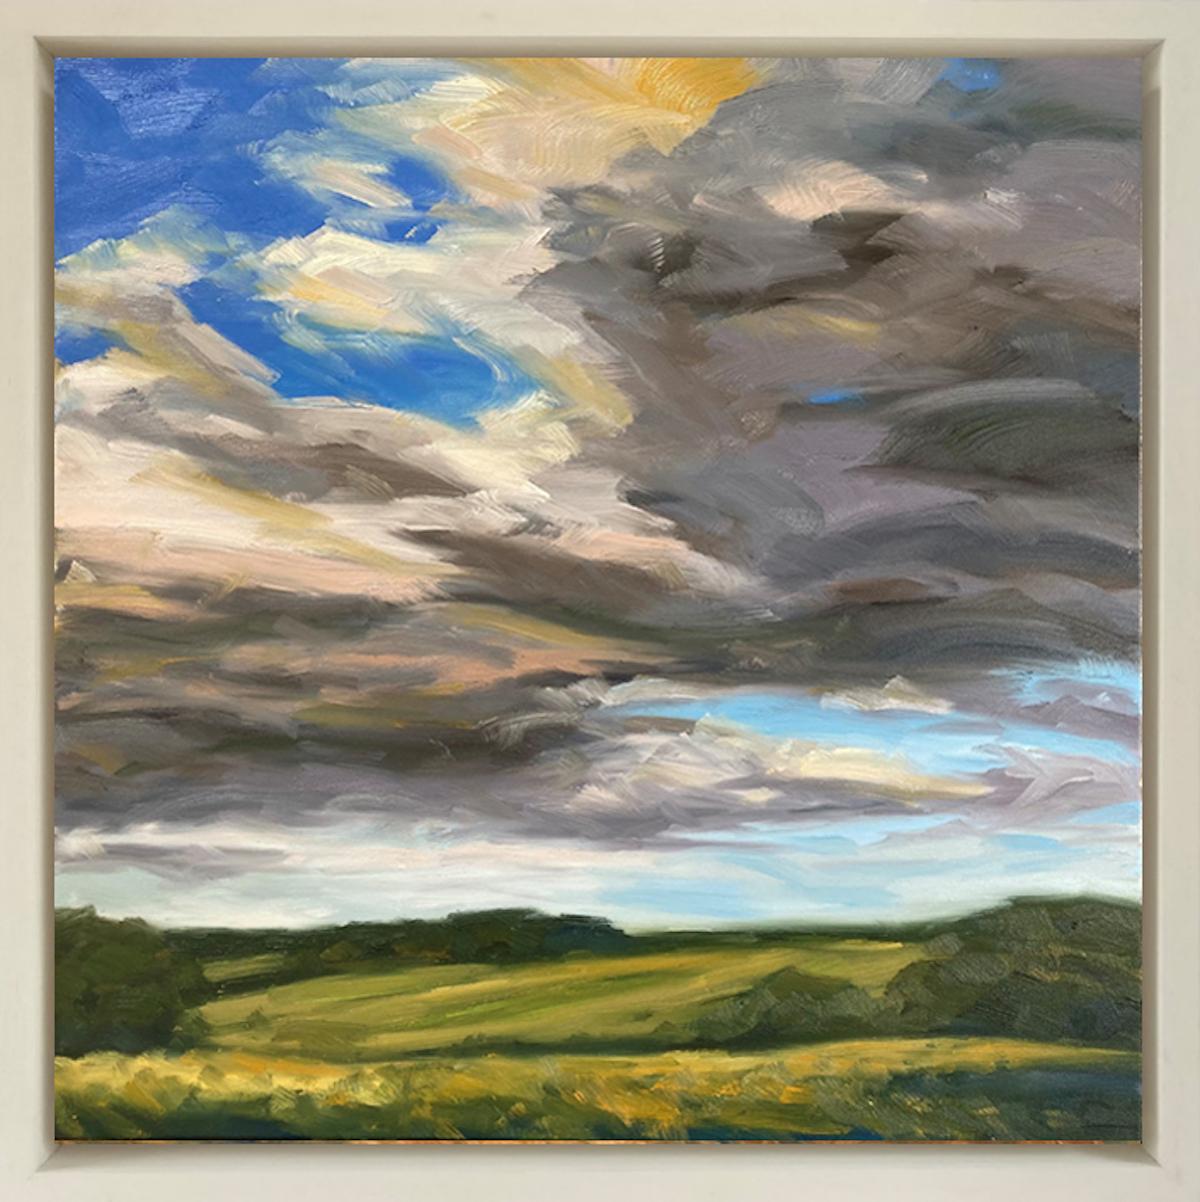 Summer Fresh I, Suzanne Winn, Contemporary Landscape painting for sale - Gray Figurative Painting by Suzanne Winn 